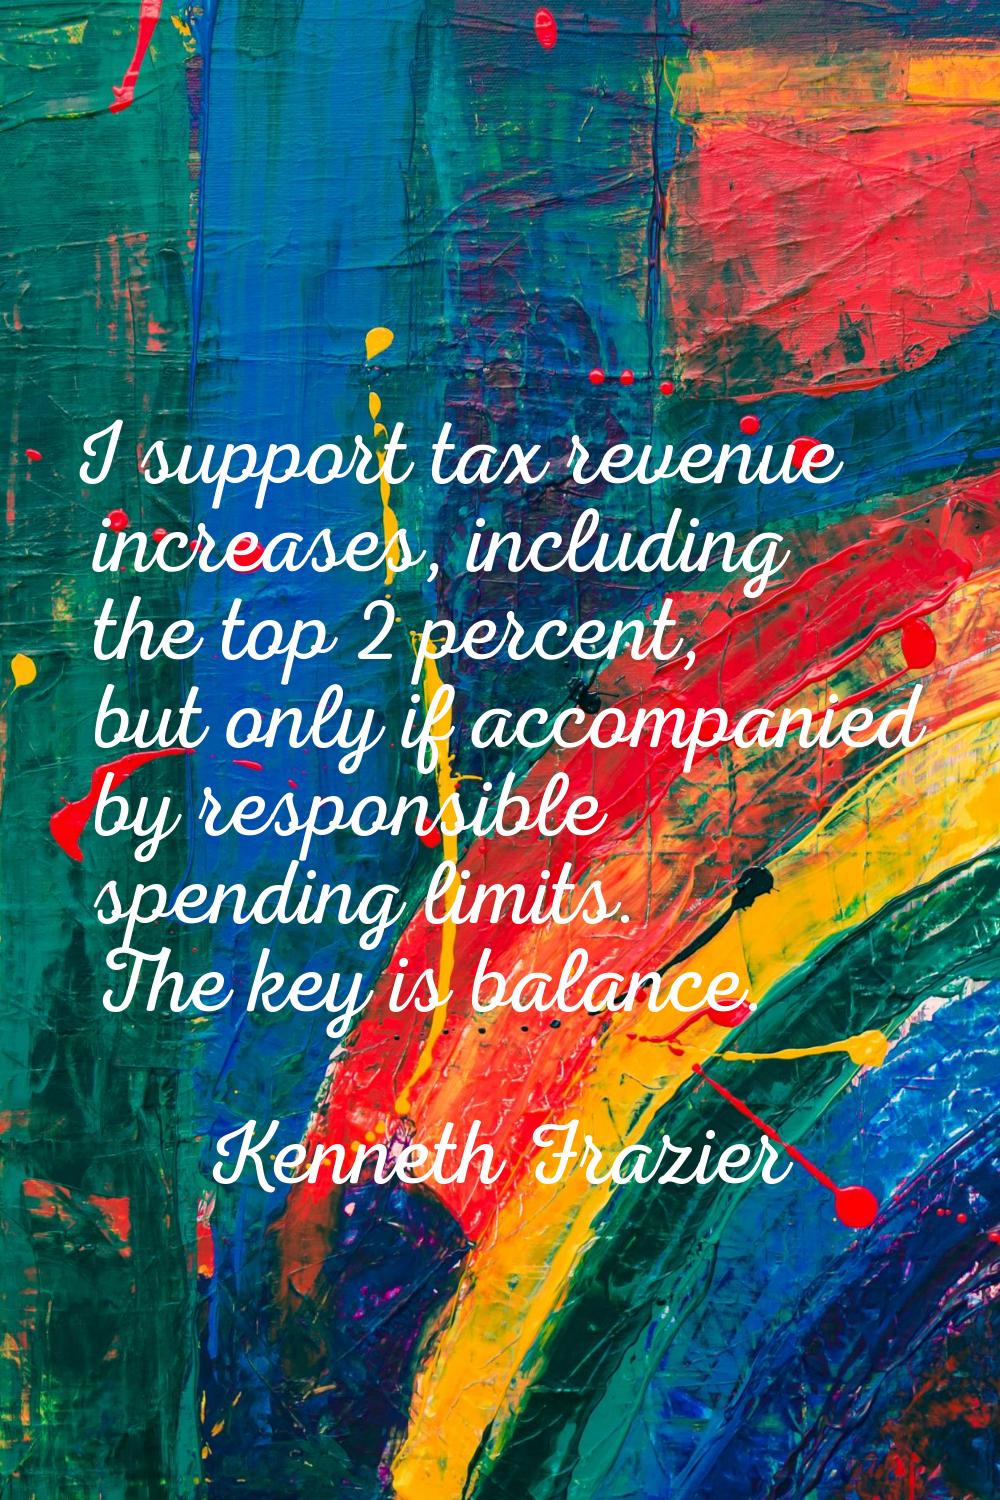 I support tax revenue increases, including the top 2 percent, but only if accompanied by responsibl